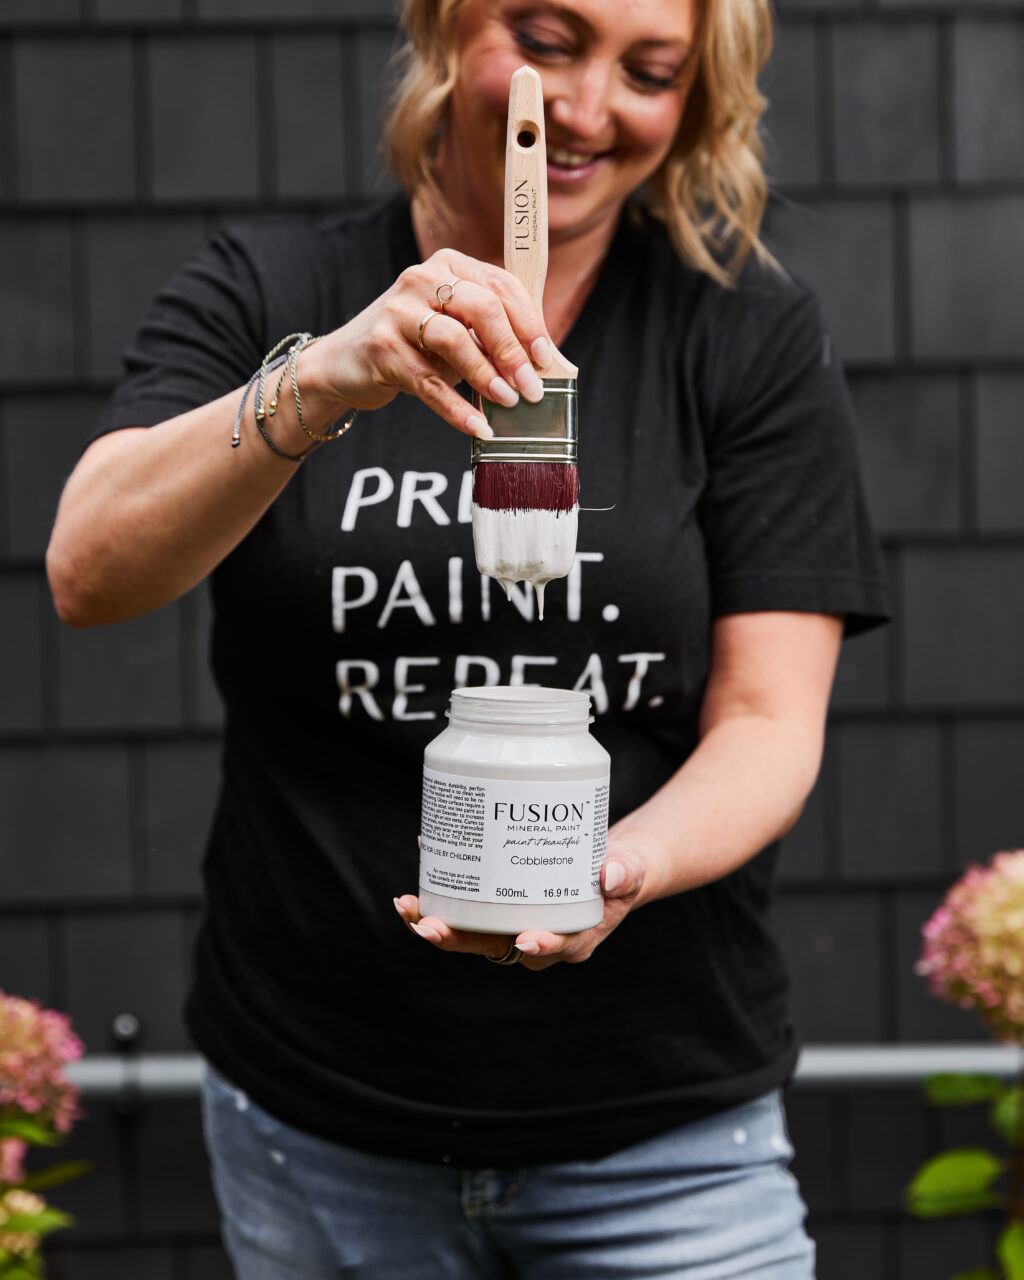 the cottage makeover series / Jennylyn holding pint of cobblestone with paint brush dripping above the pint